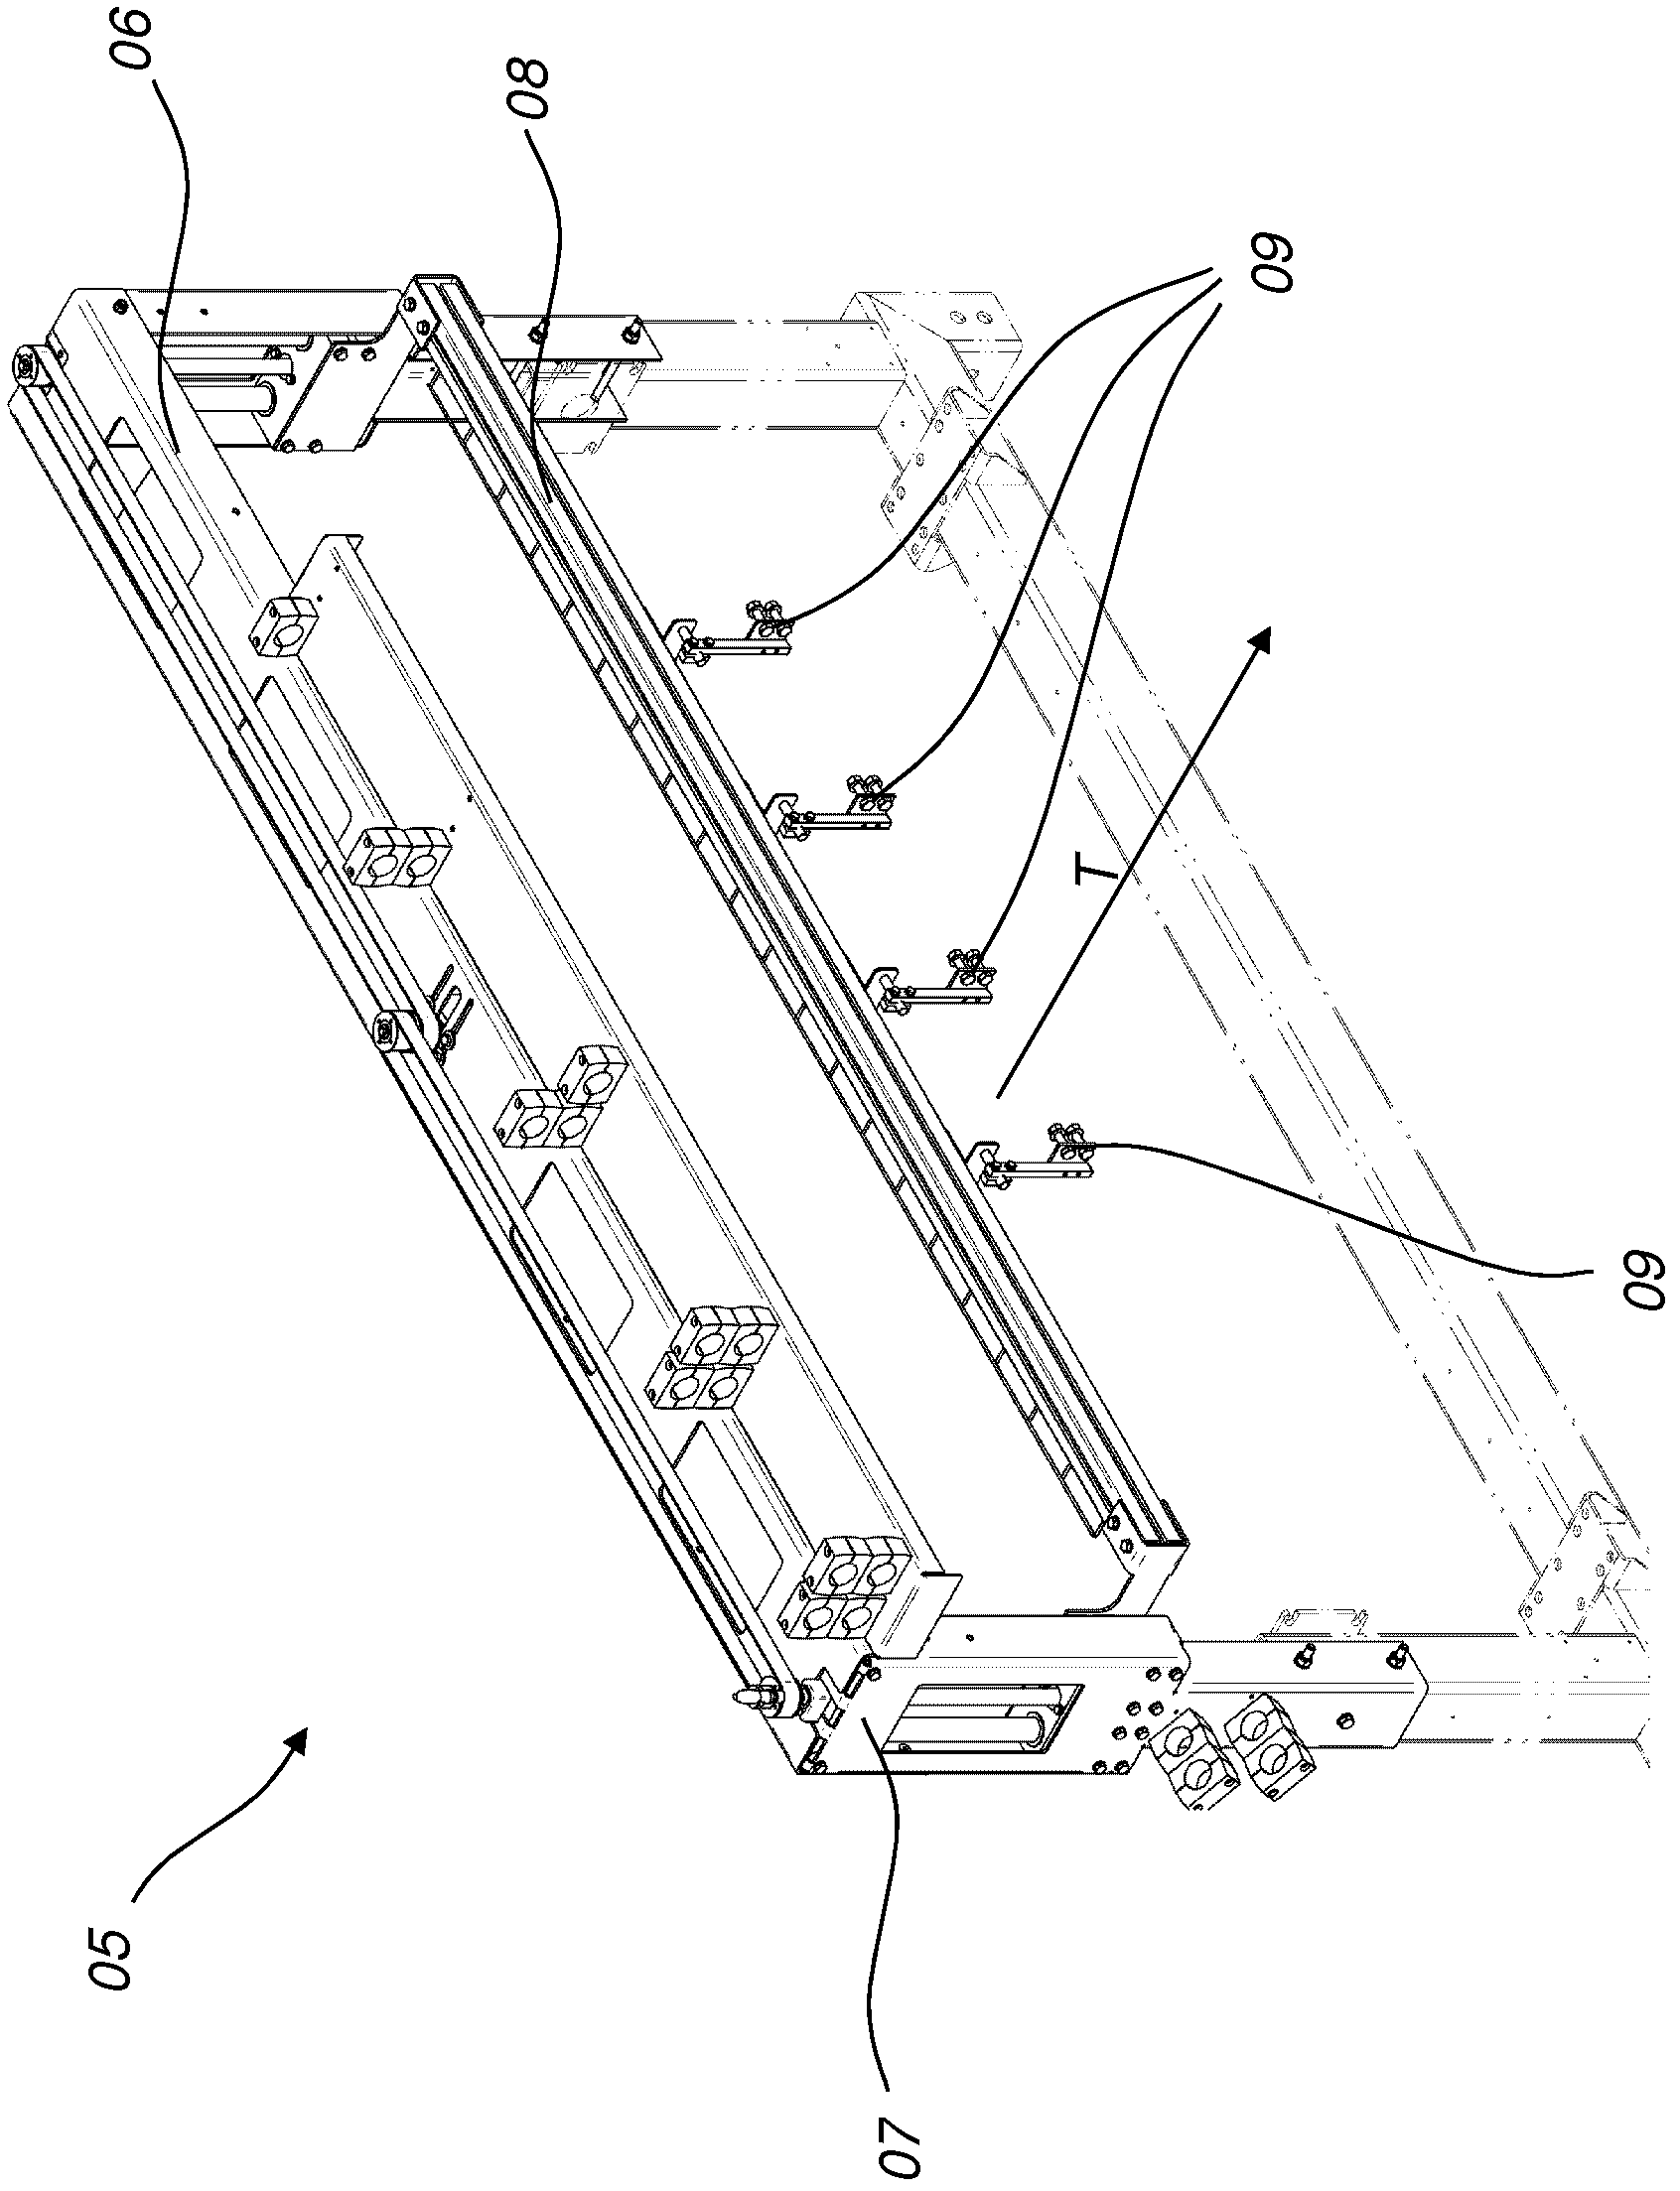 Device and method for applying an adhesive friction increasing material on an upper surface batch of a stack layer